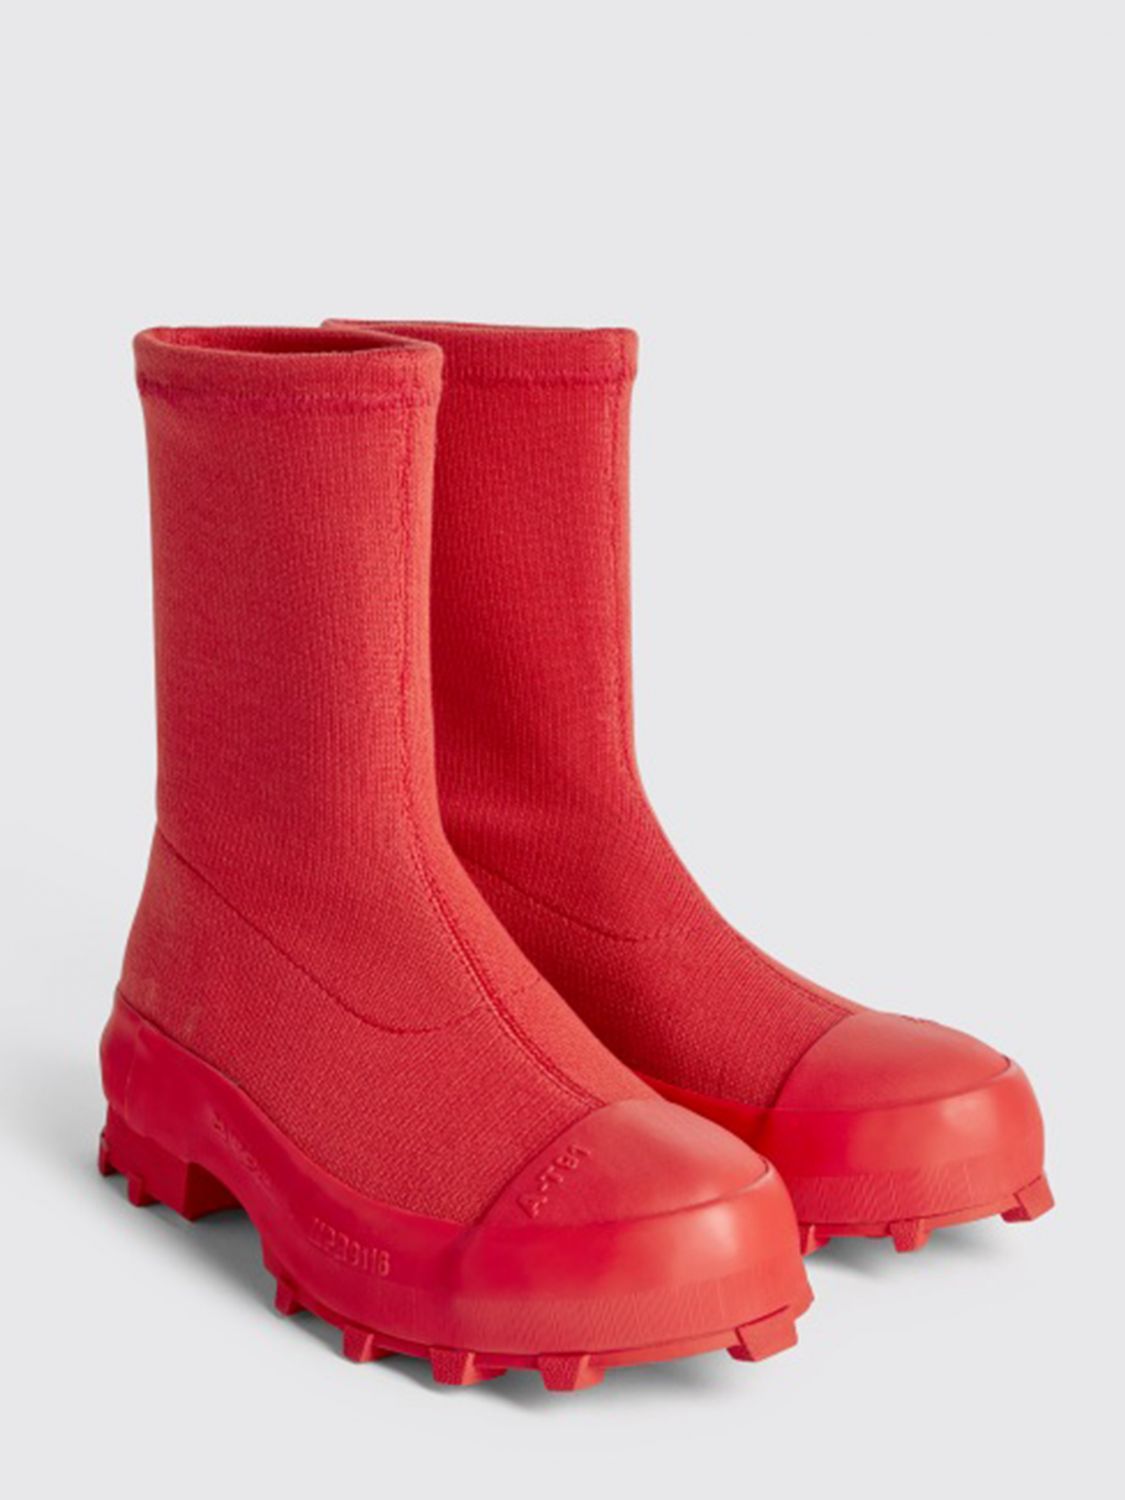 Flat ankle boots Camperlab: Traktori CamperLab fabric boot red 2